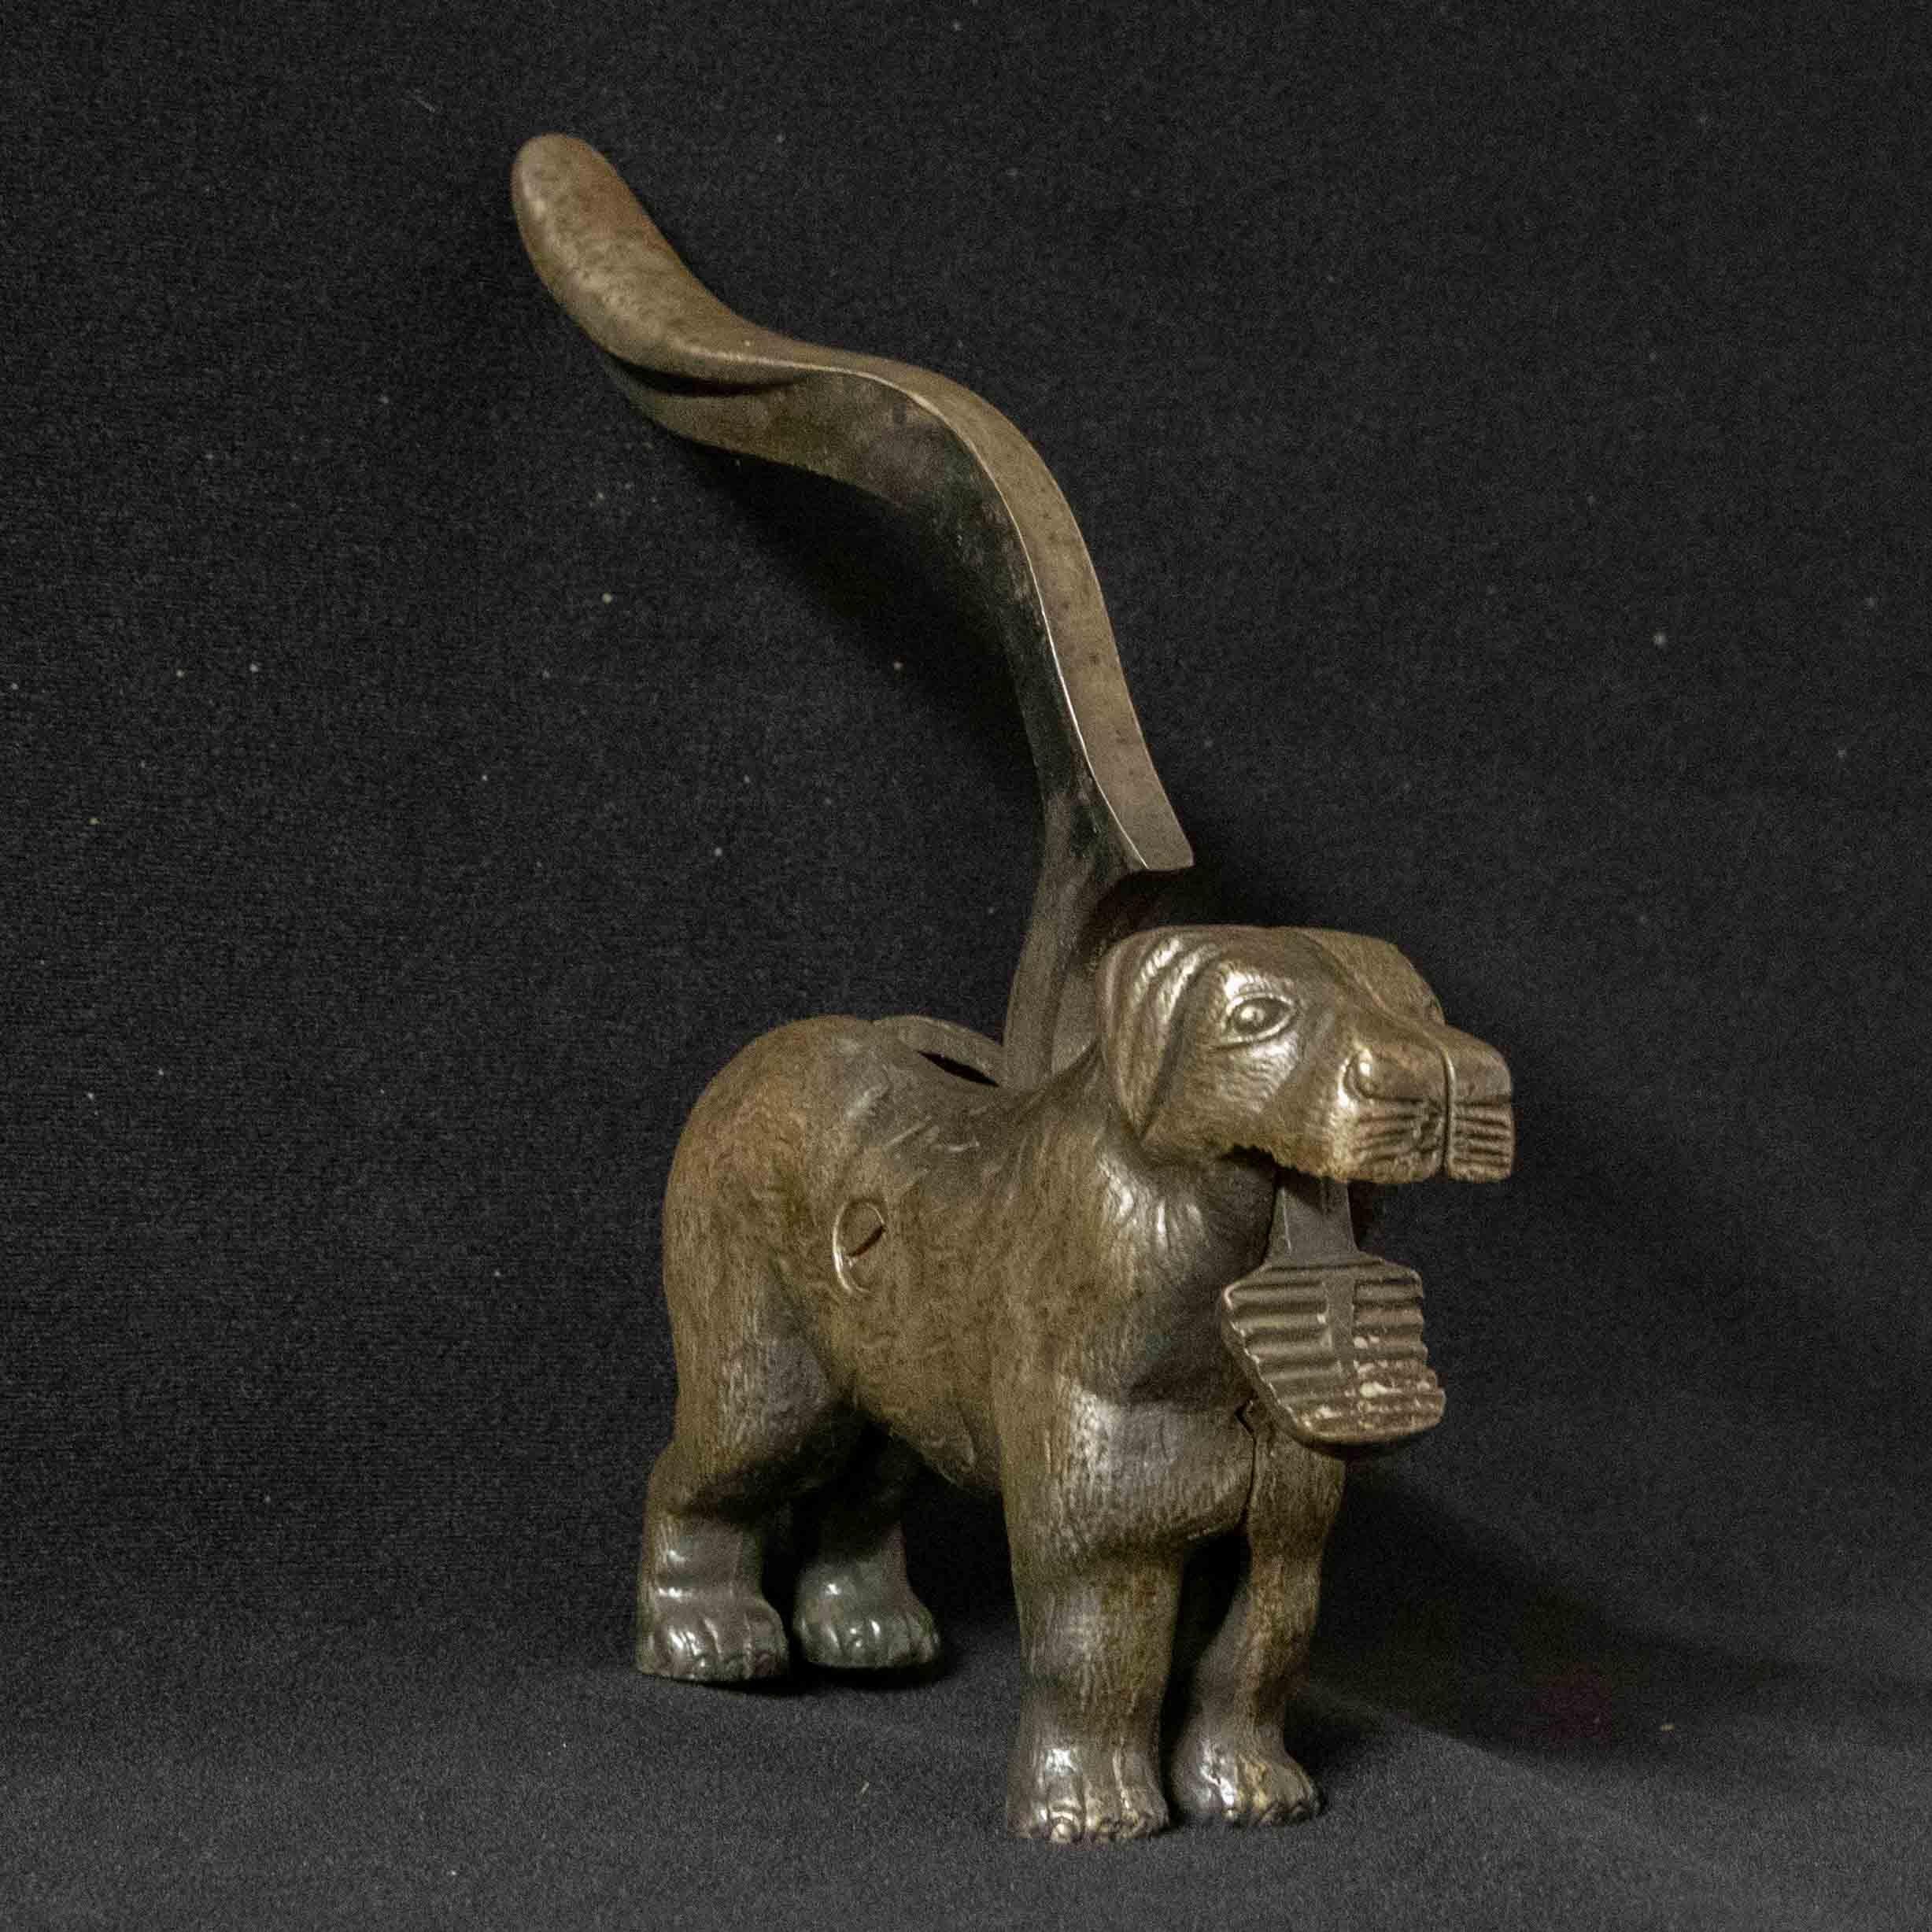 A rare find that is totally unused, this is a Linton dog nut cracker in the form of a dog and levered by its tail. Possibly a gift to someone in the 1930s and stored in a drawer ever since. It's a heavy substantial piece that feels weighty and will